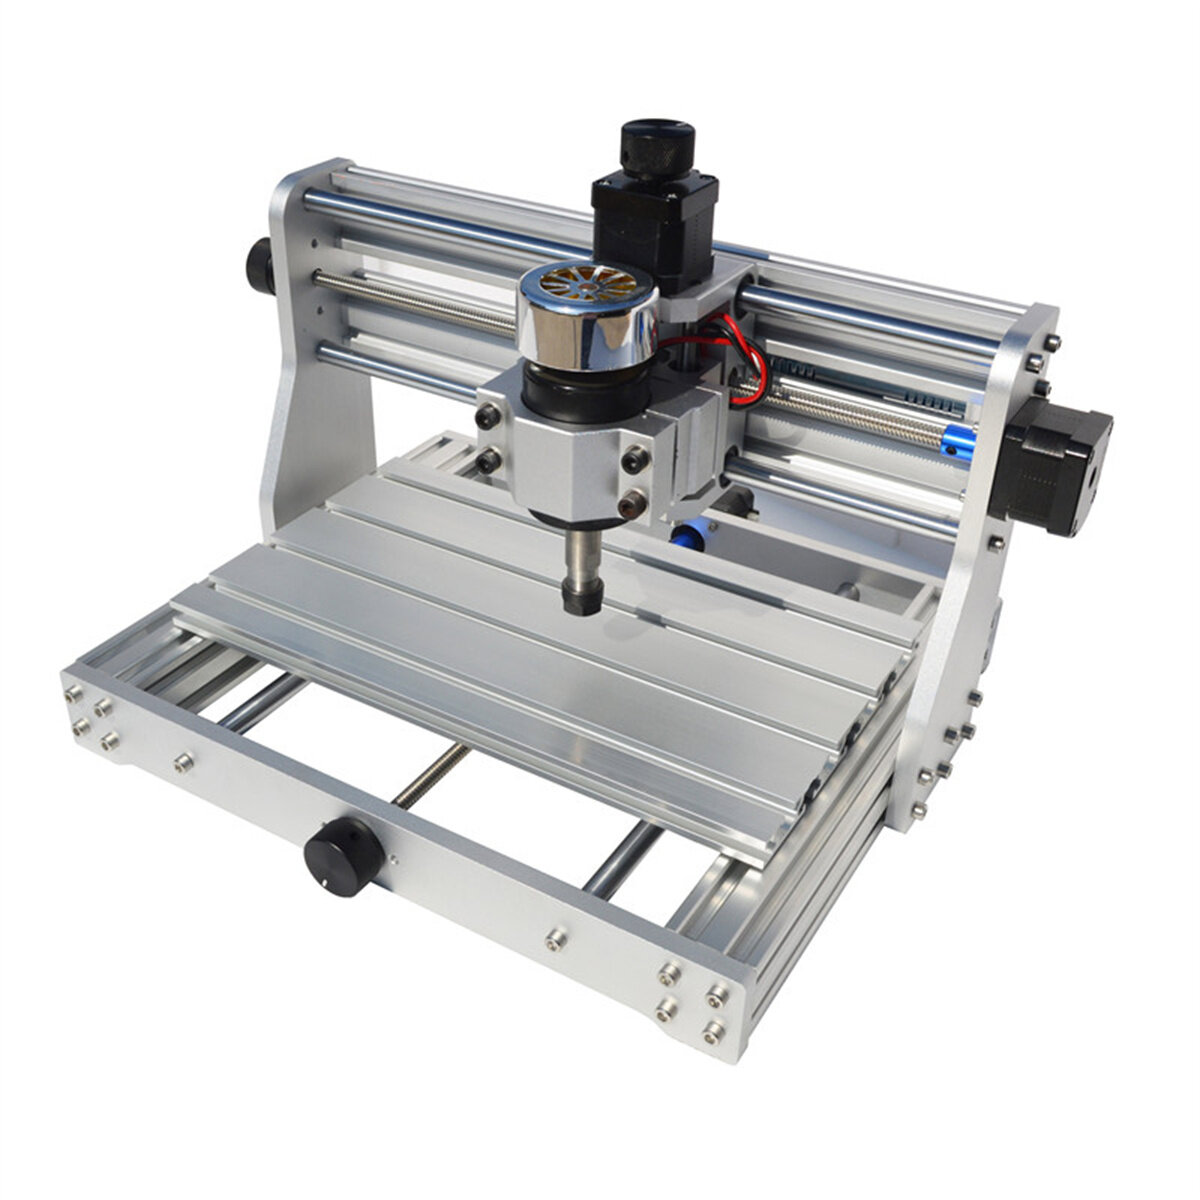 

Fan’ensheng New CNC 3018 Max CNC Router Metal Engraving Machine GRBL Control With 200w Spindle DIY Engraver Woodworking